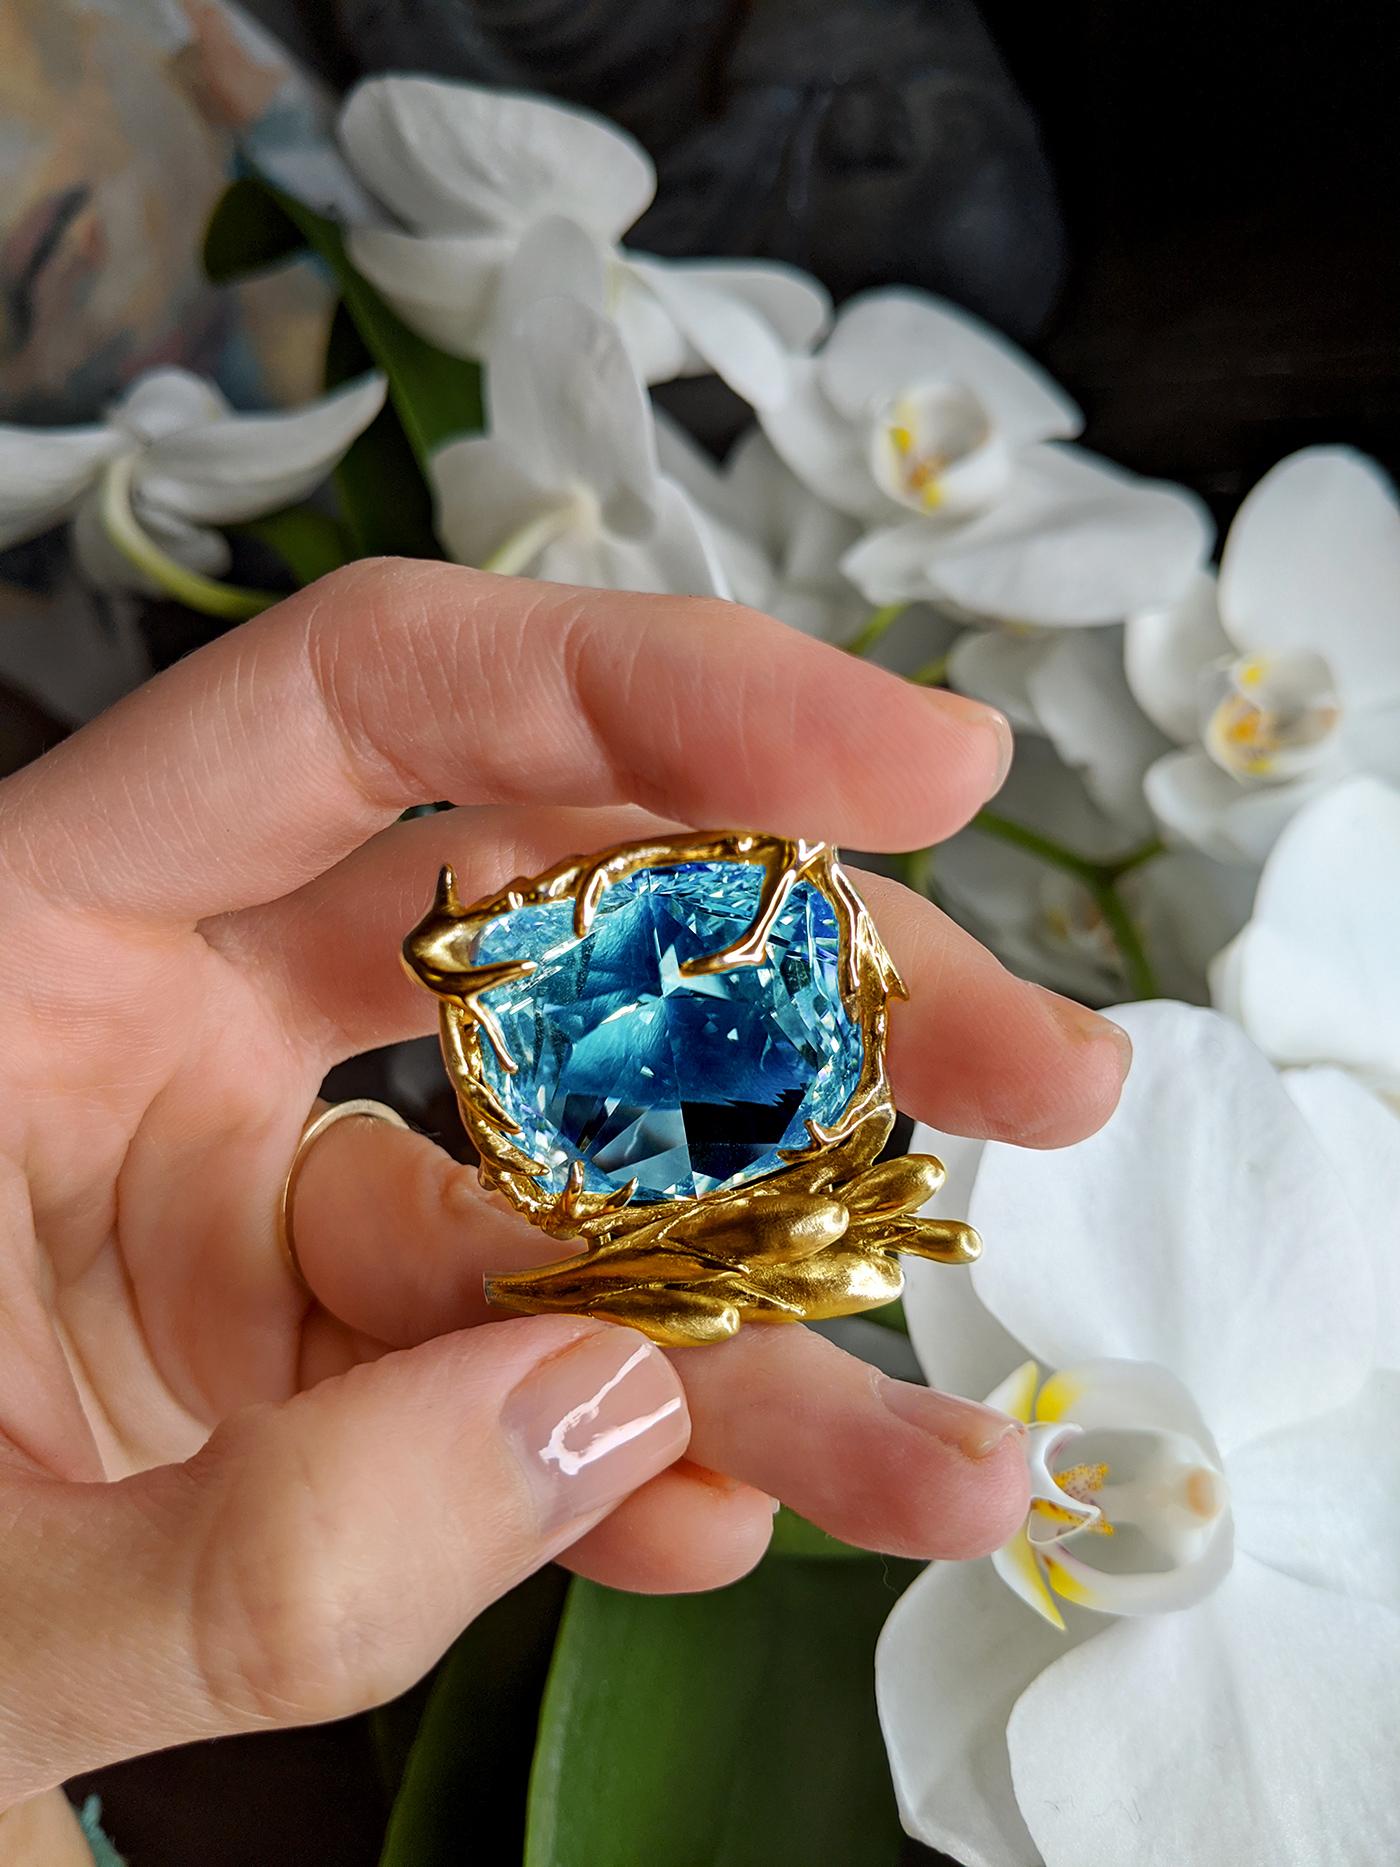 This pendant necklace features a large blue topaz at its center, set in 18 karat yellow gold. The size of the topaz makes its vivid marine color even more striking, and it complements the bright and saturated gold perfectly.

The artist behind this